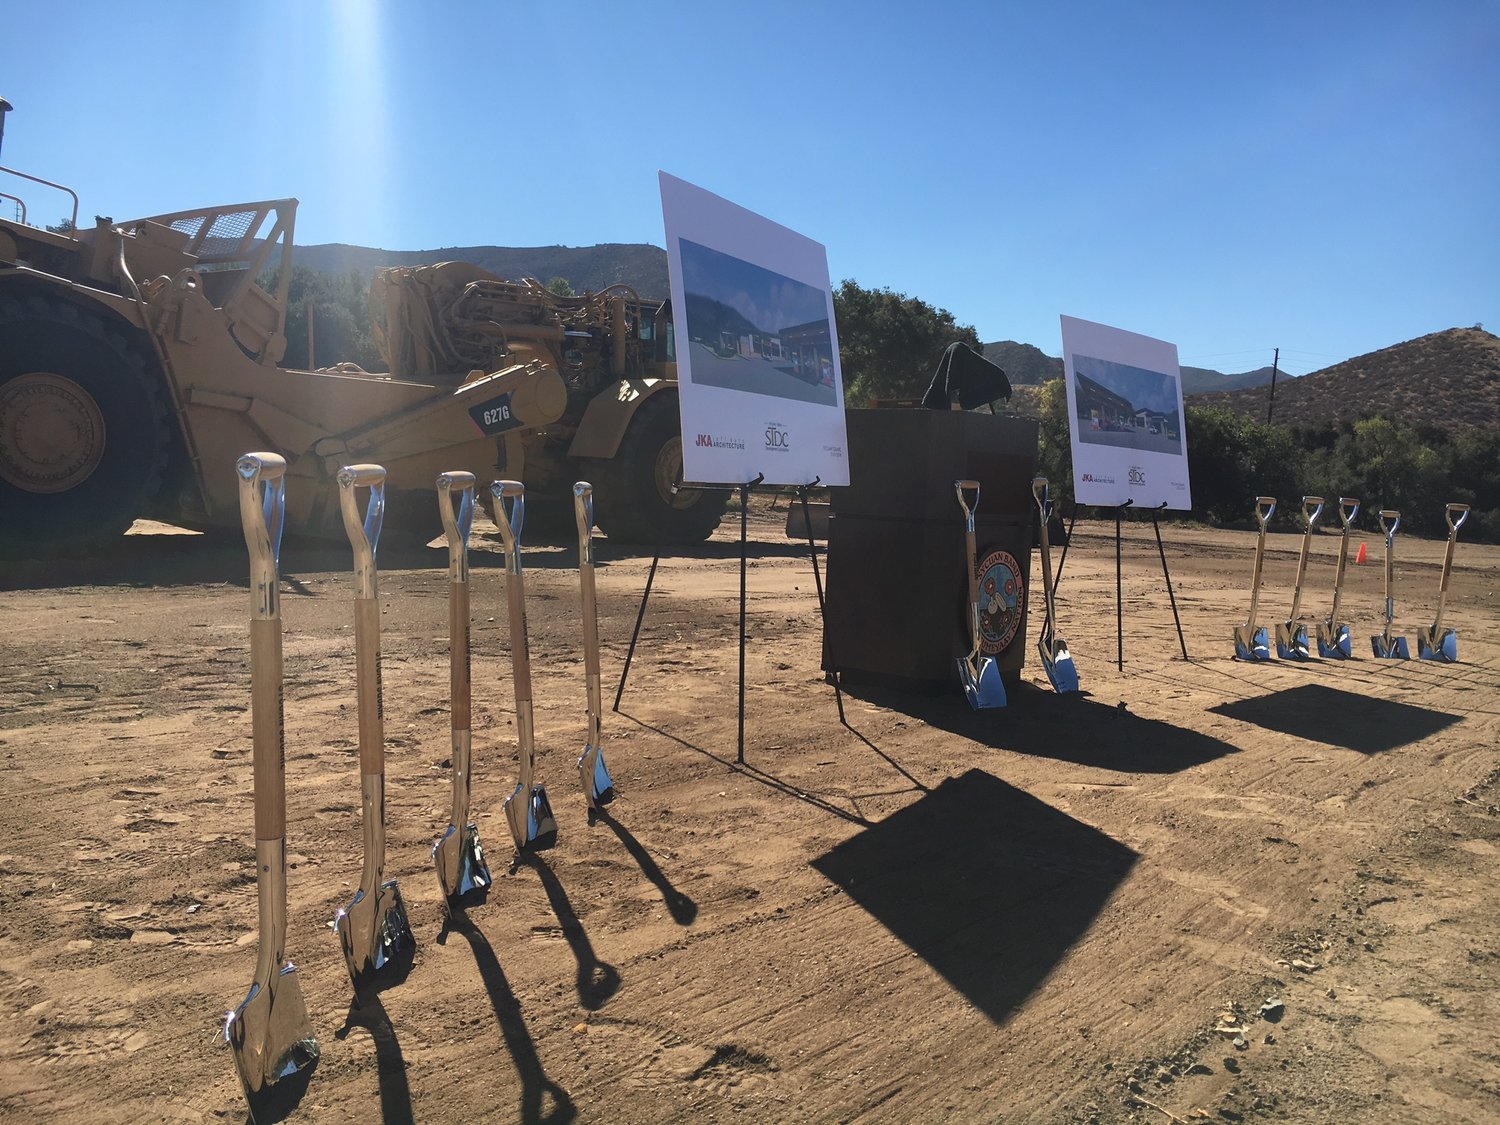 Sycuan-Square-Ground-Breaking-Ceremony-shovels-lined-up-in-front-of-construction-vehicles.jpg